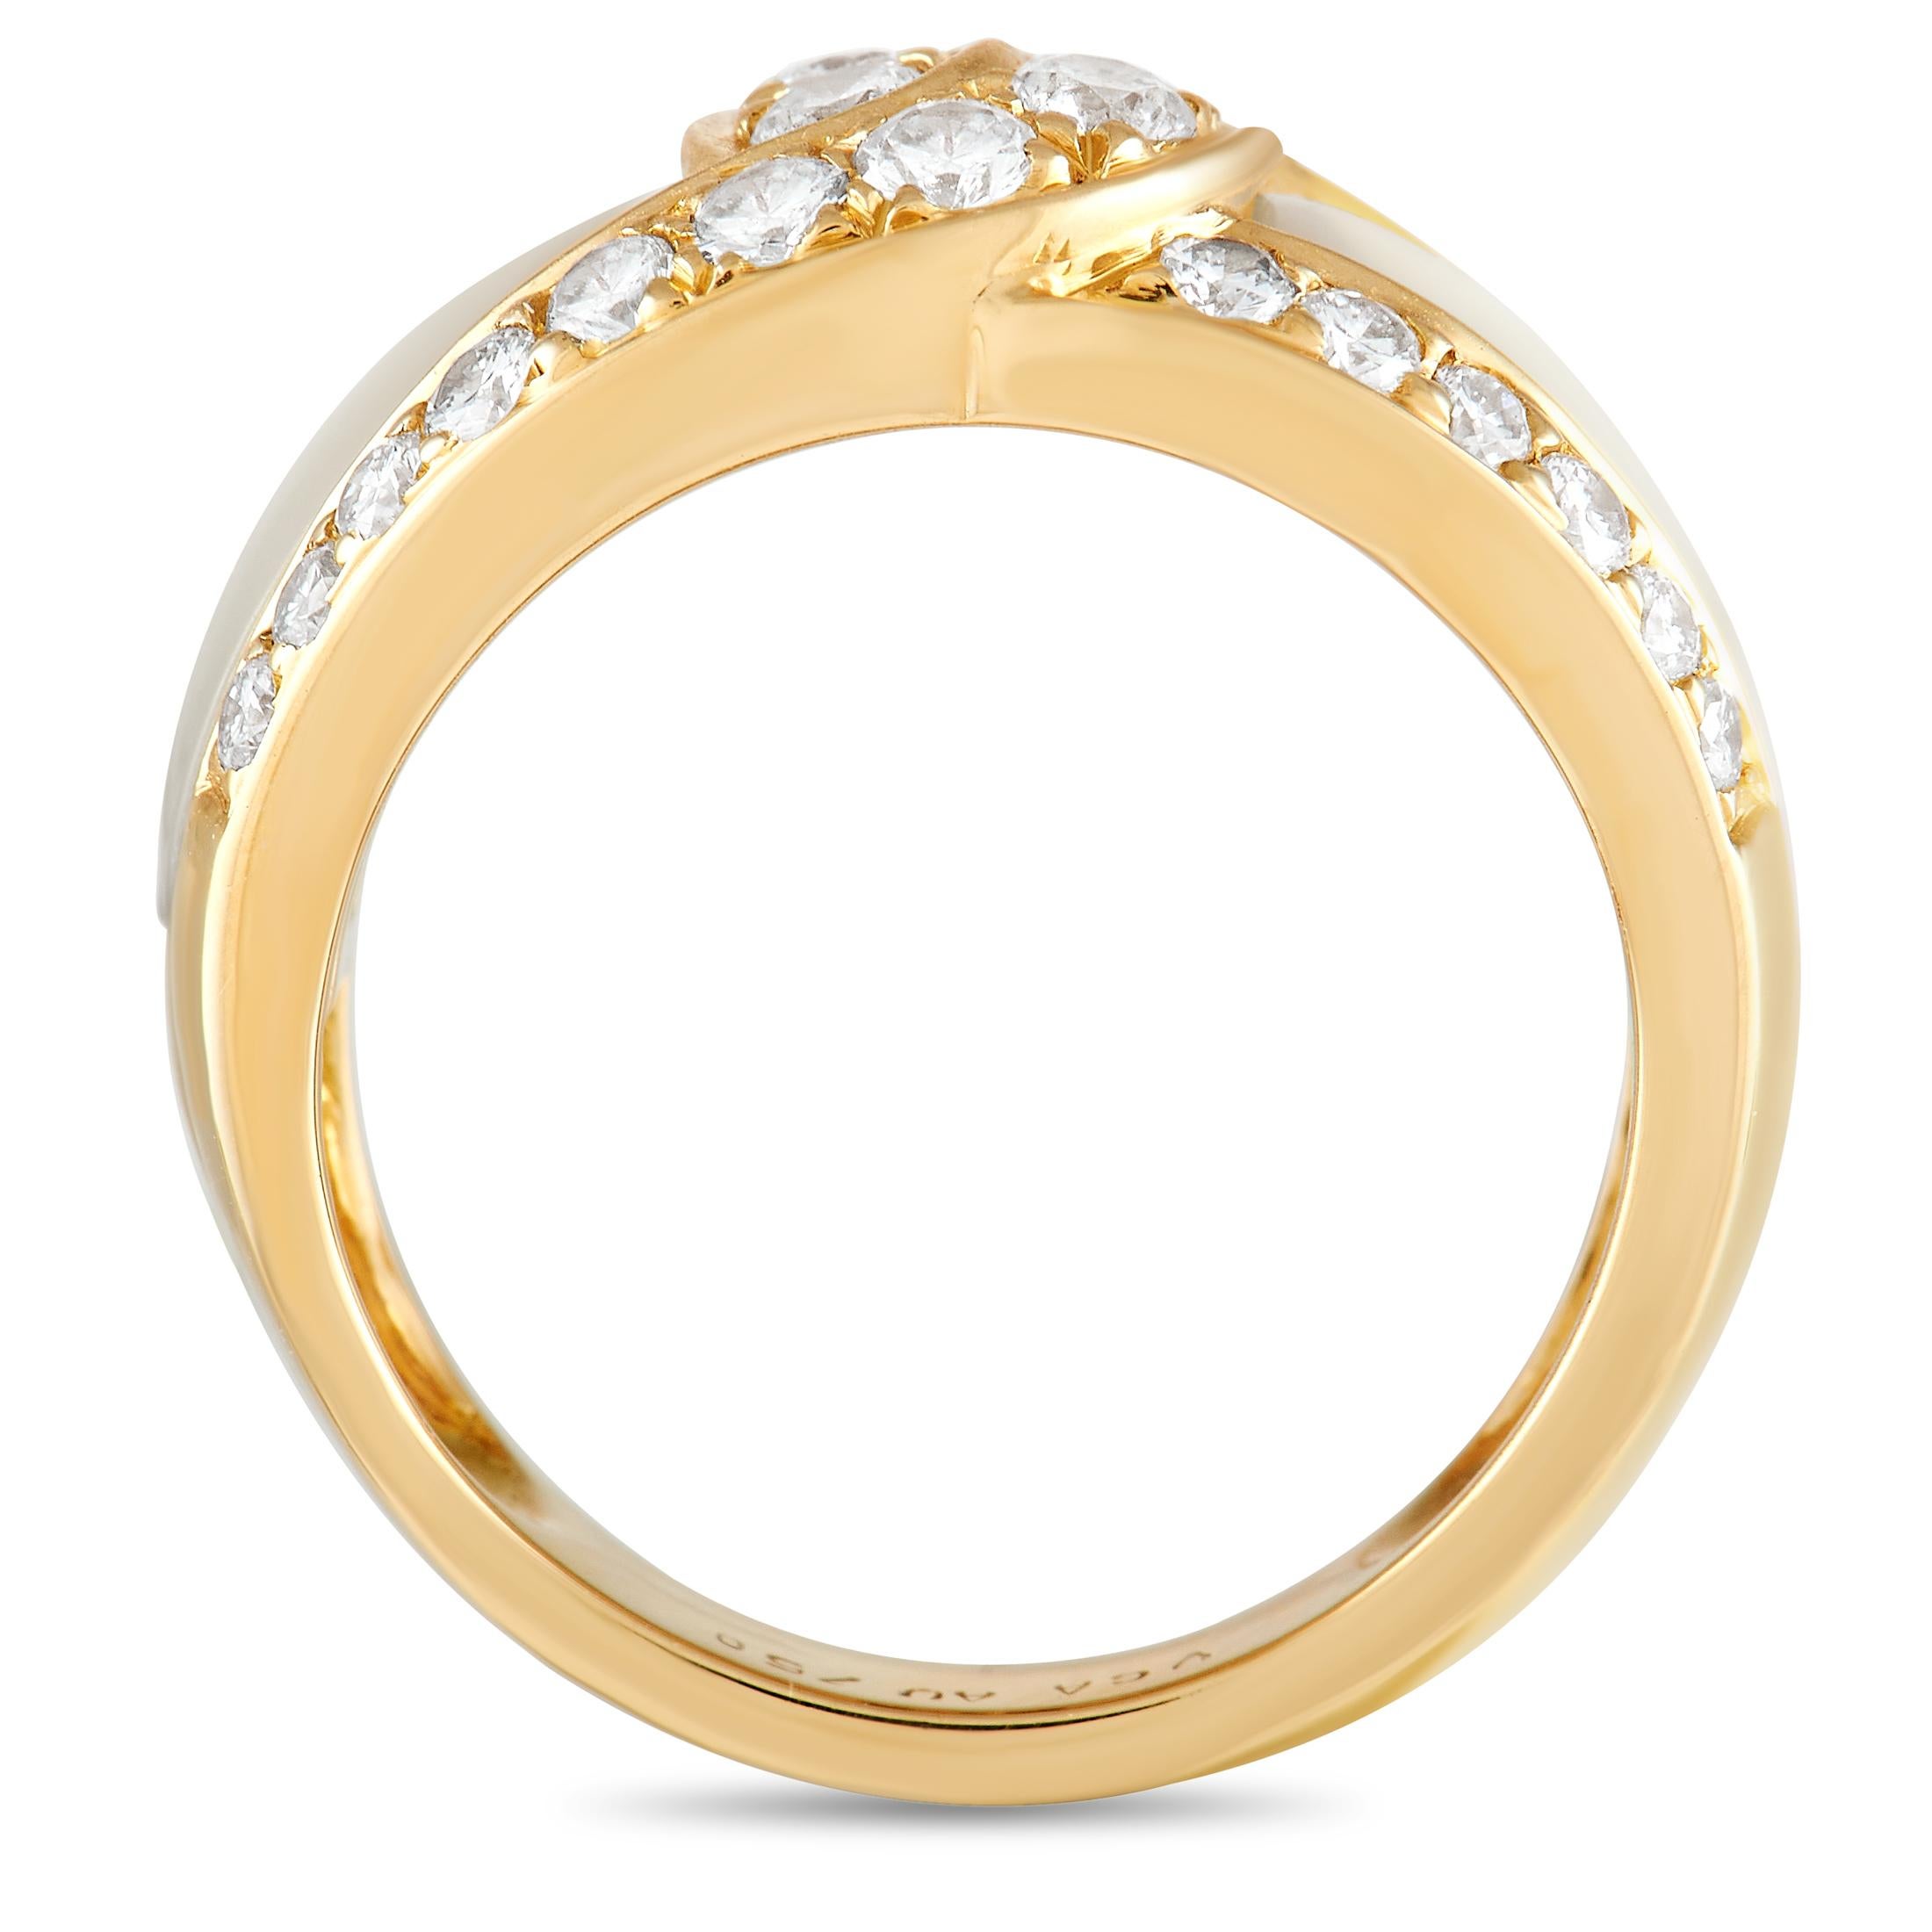 This luxurious Van Cleef & Arpels ring features a spectacular sense of movement. Diamonds with a total weight of 0.96 carats are beautifully displayed within the dynamic 18K Yellow Gold setting, which features a 6mm wide band and a 4mm top height.